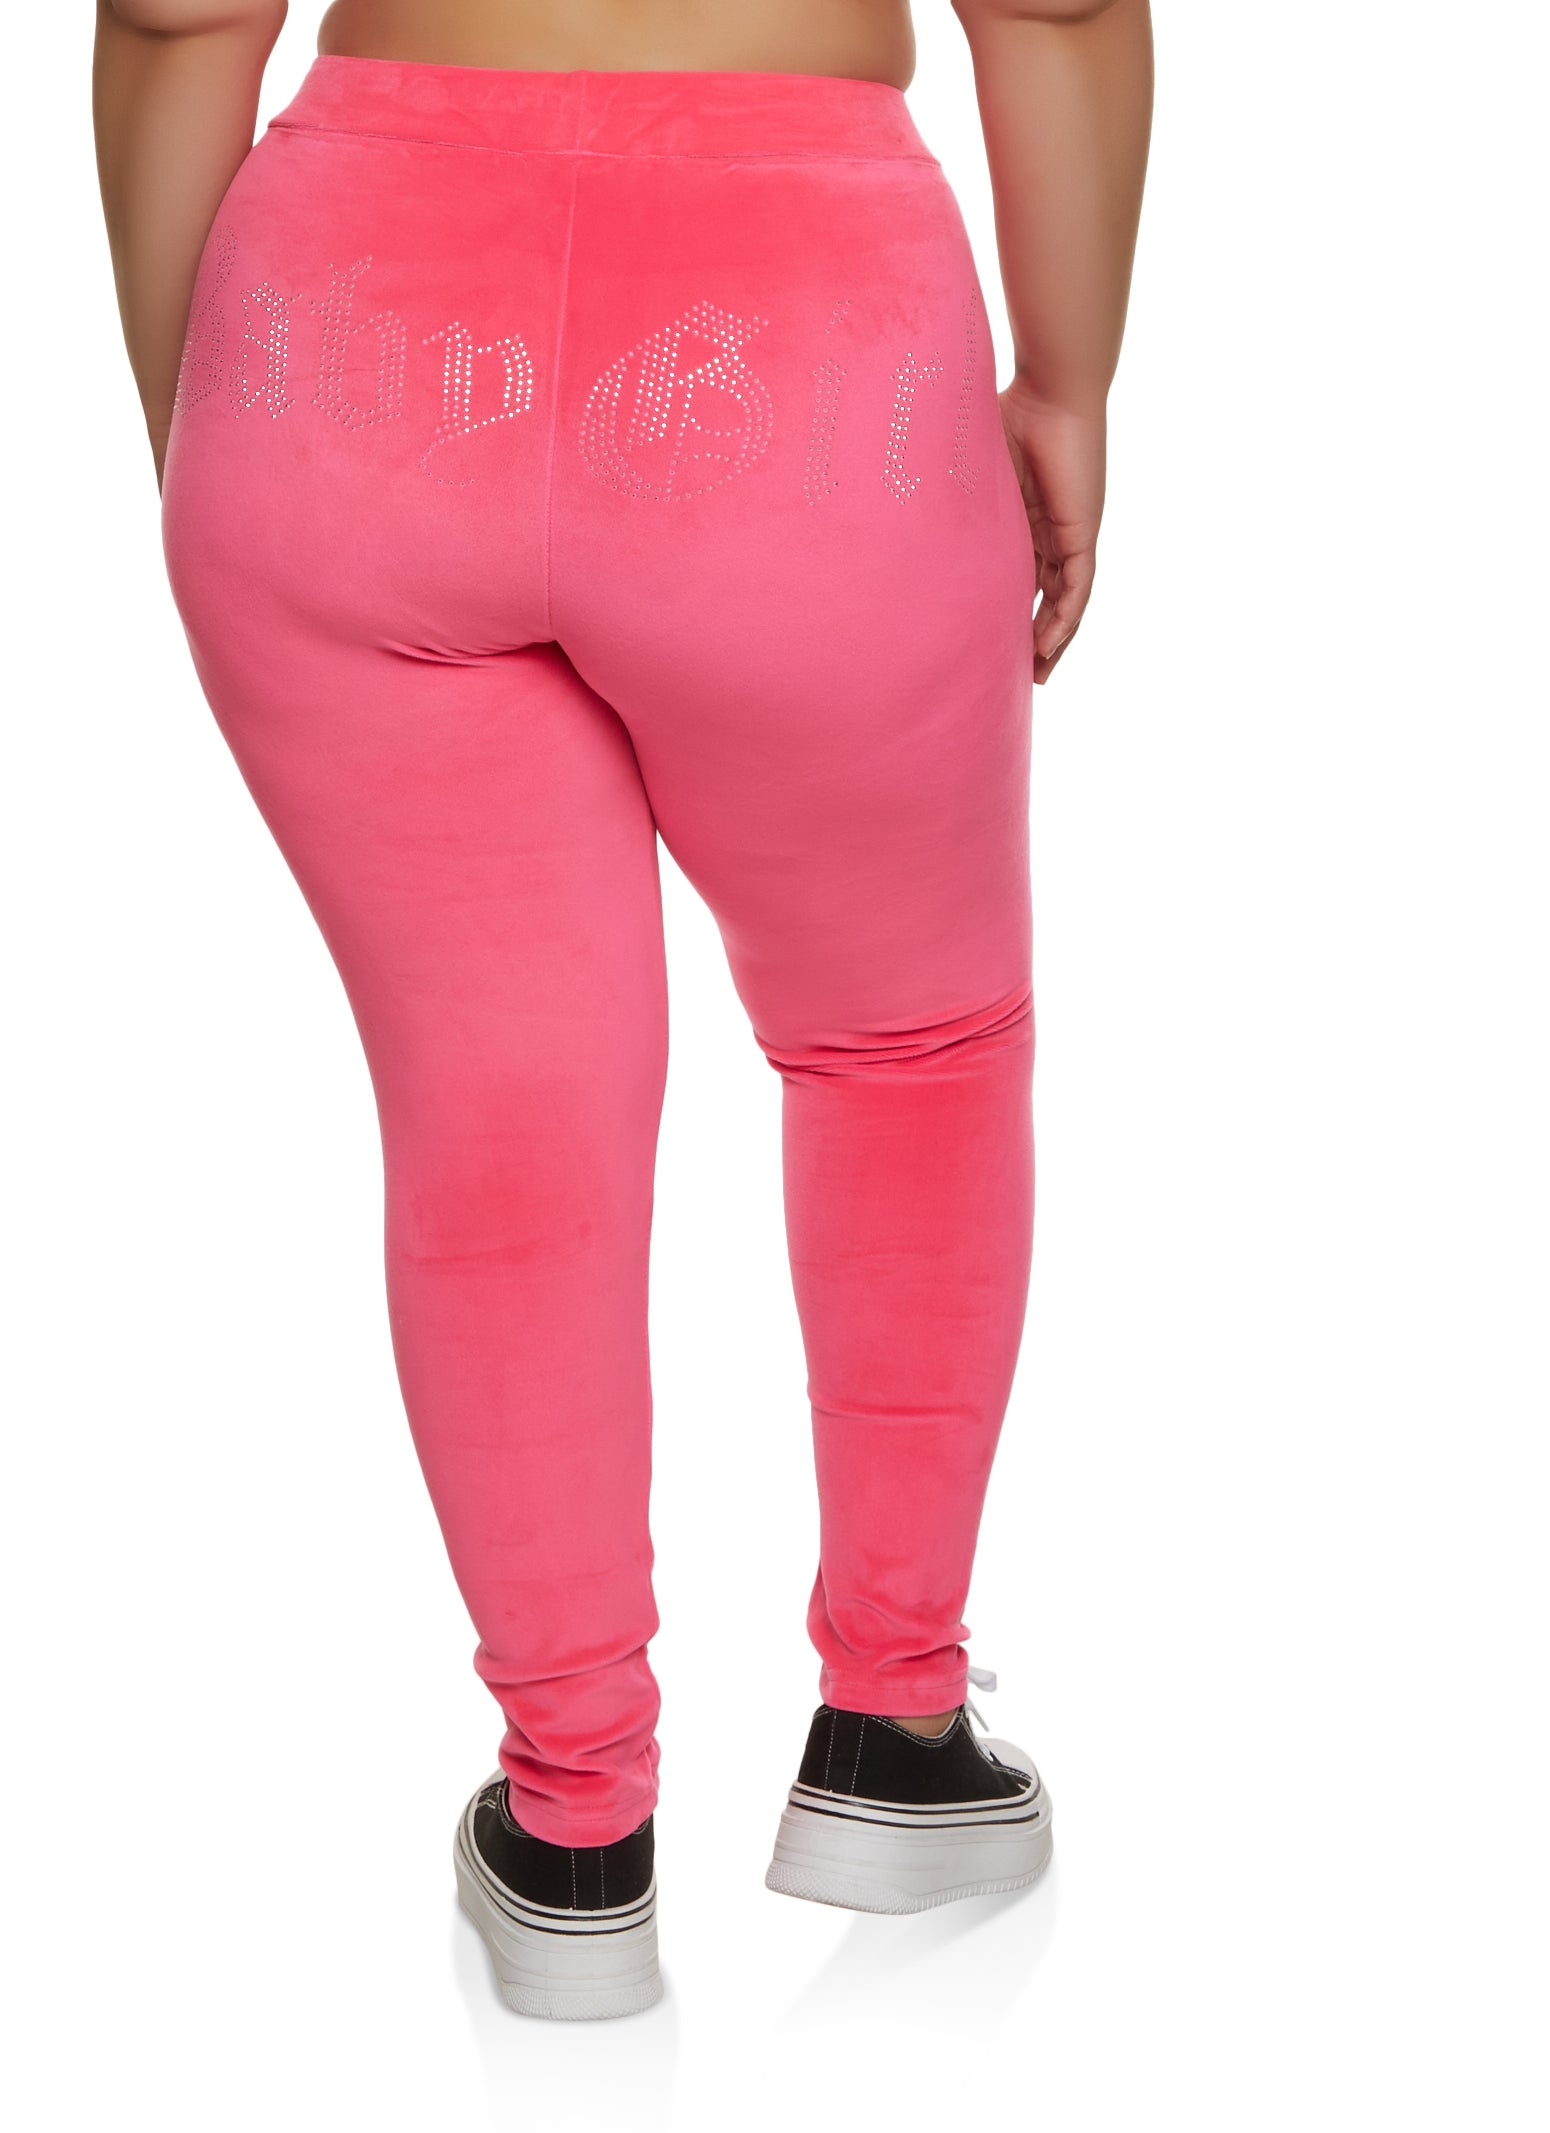 Plus Size Red Leggings, Everyday Low Prices